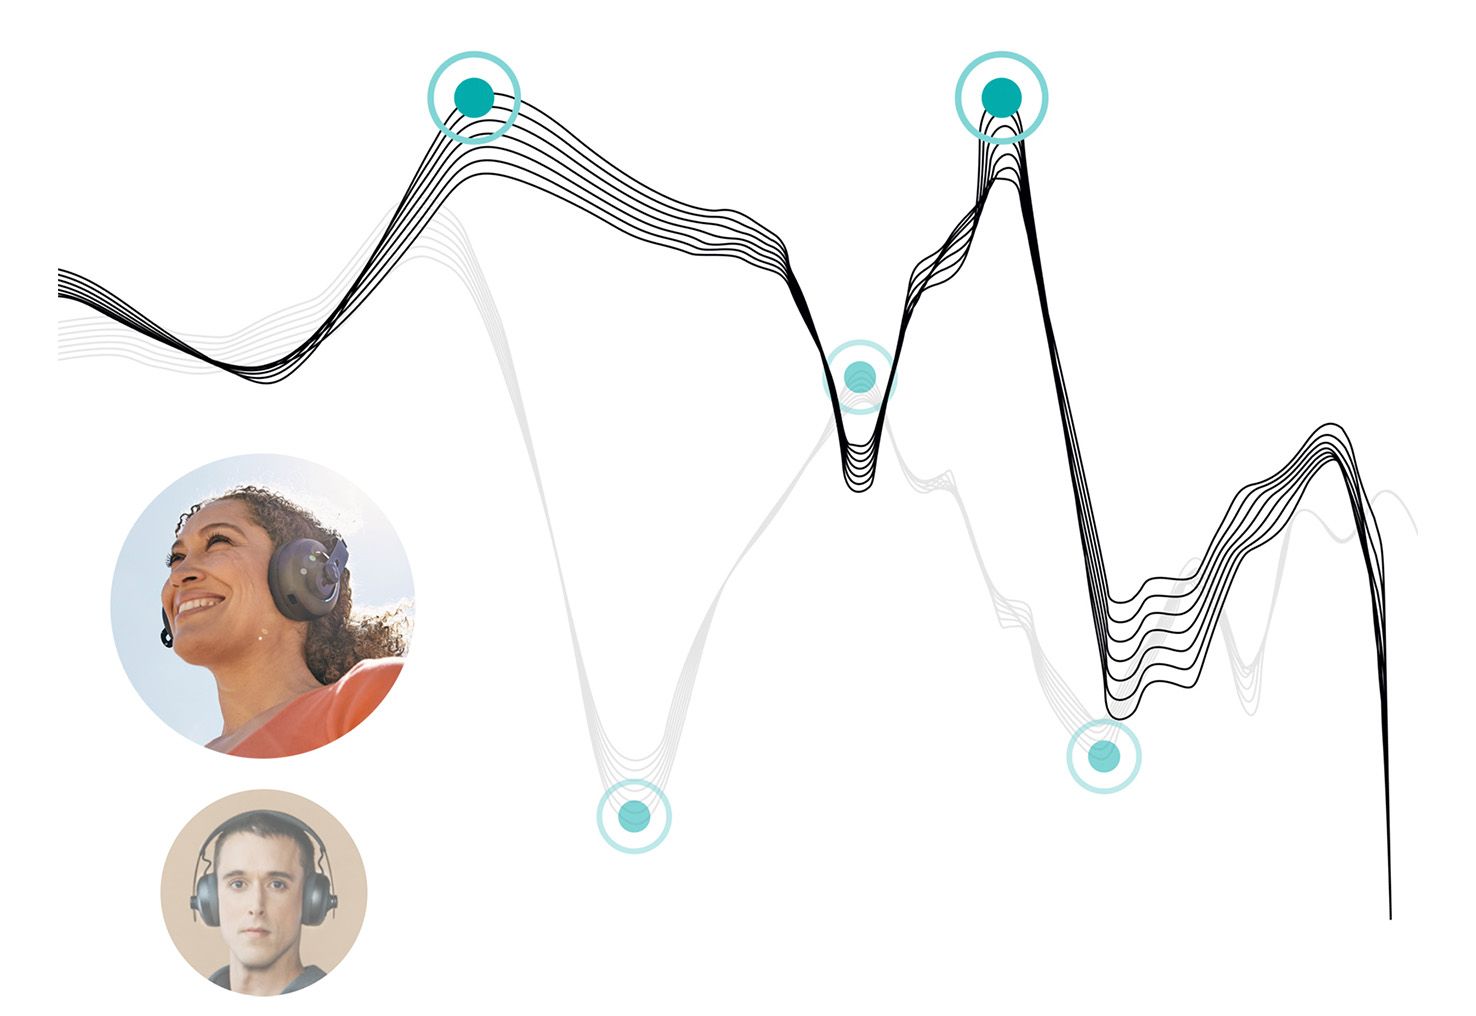 Diagram showing how listening experience can differ between two people using Otoacoustic Emissions (OAEs)